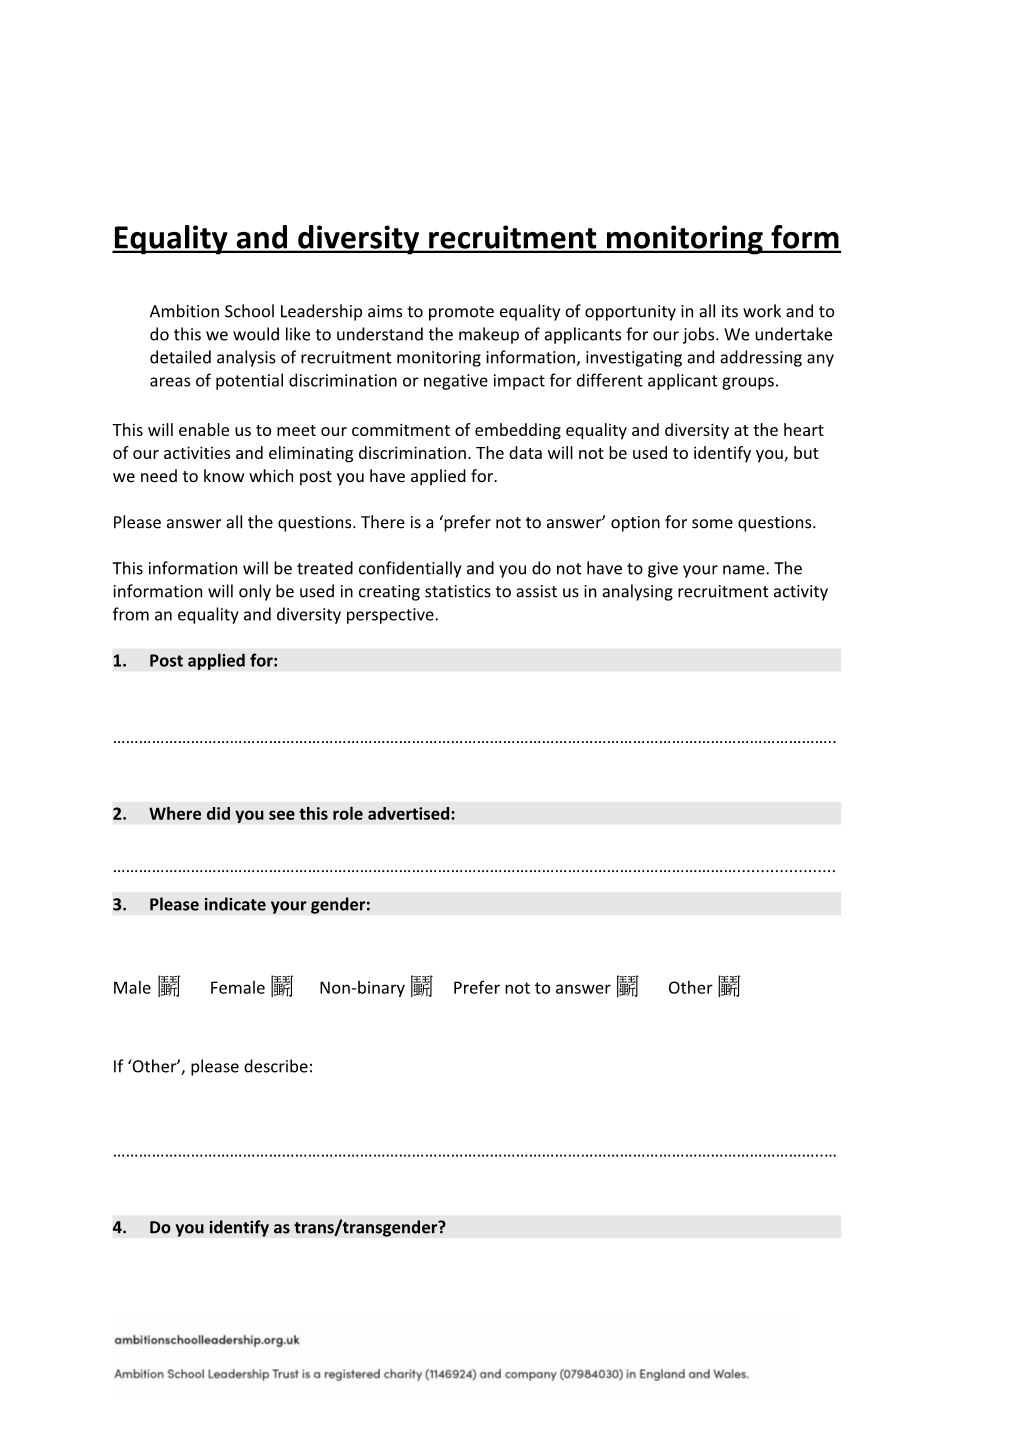 Equality and Diversity Recruitment Monitoring Formambition School Leadership Aims to Promote